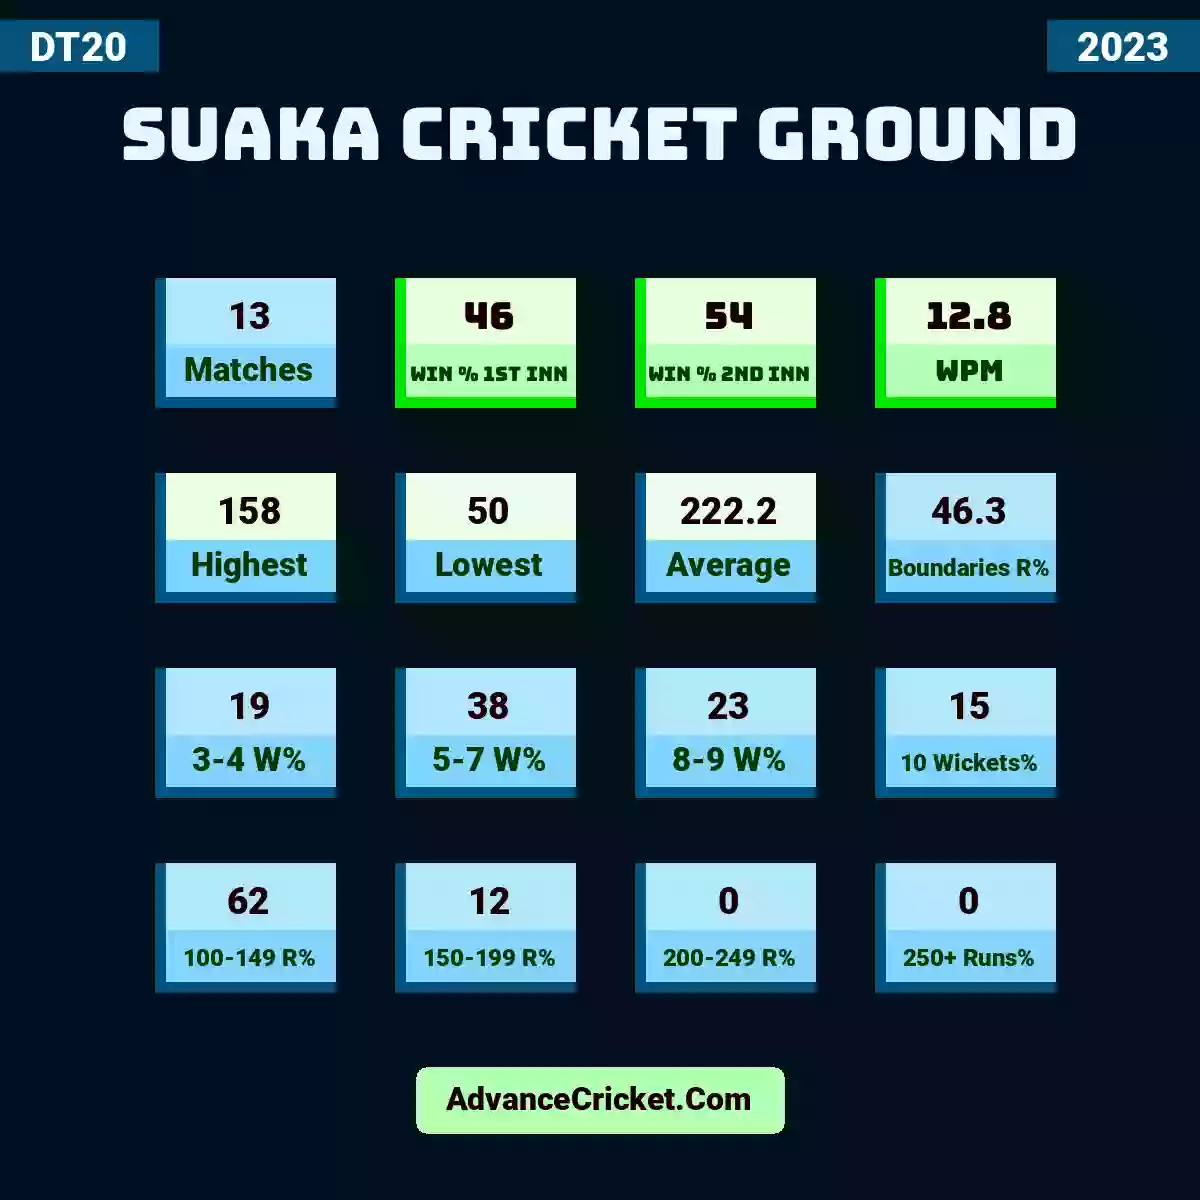 Image showing Suaka Cricket Ground with Matches: 13, Win % 1st Inn: 46, Win % 2nd Inn: 54, WPM: 12.8, Highest: 158, Lowest: 50, Average: 222.2, Boundaries R%: 46.3, 3-4 W%: 19, 5-7 W%: 38, 8-9 W%: 23, 10 Wickets%: 15, 100-149 R%: 62, 150-199 R%: 12, 200-249 R%: 0, 250+ Runs%: 0.